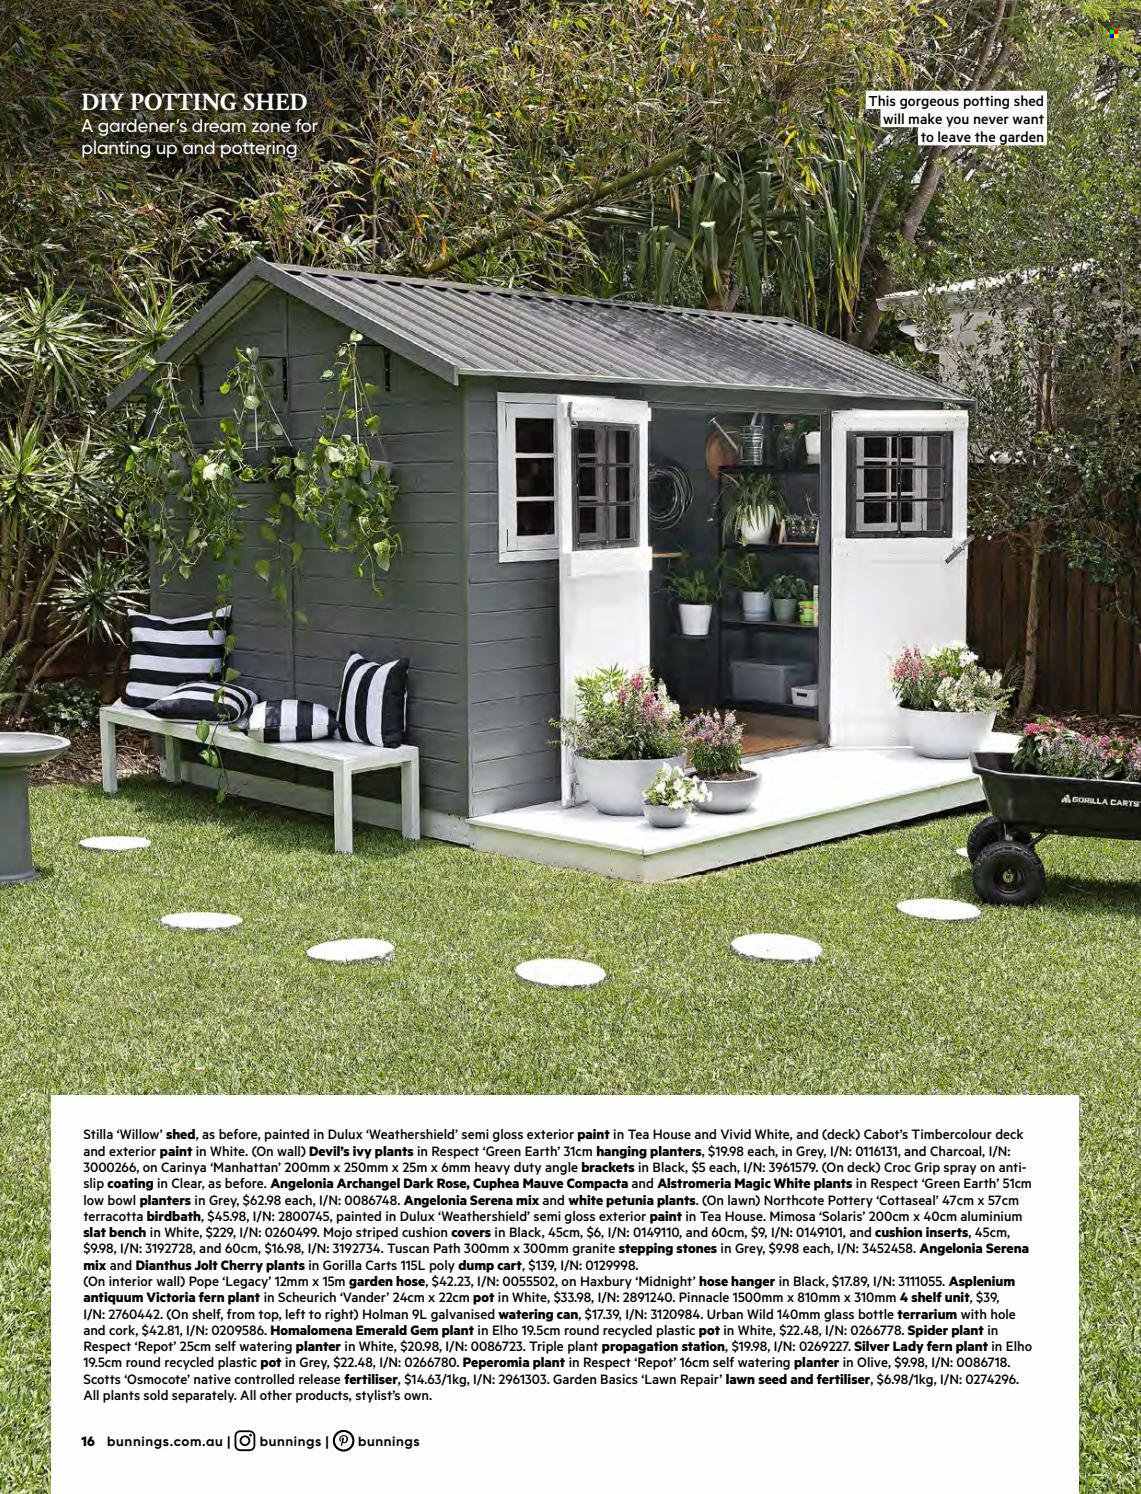 thumbnail - Bunnings Warehouse mailer - 01.01.2022 - 31.01.2022 - Sales products - bench, shelf unit, cushion, hanger, pot, bowl, paint, Dulux, cart, shed, watering can, plant seeds, rose, garden hose. Page 16.